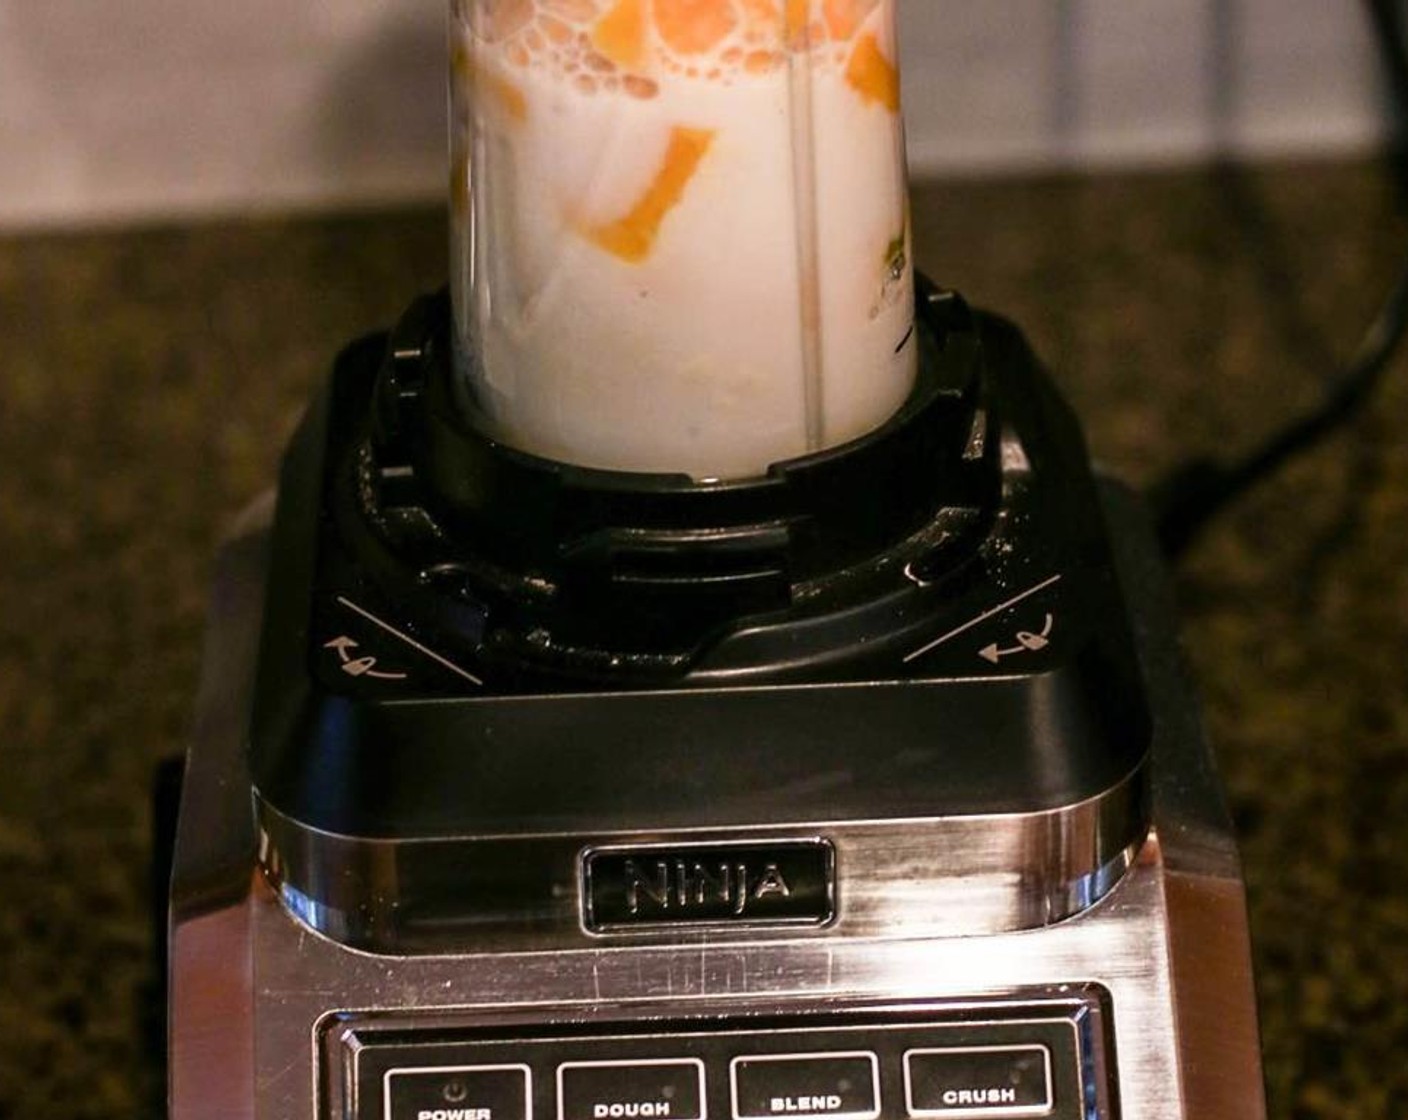 step 1 Pour Almond Milk (1 cup), Banana (1), Cantaloupe (1/2 cup), Vanilla Protein Powder (1 scoop), Powdered Stevia (2 packets) into the blender and blend until smooth.